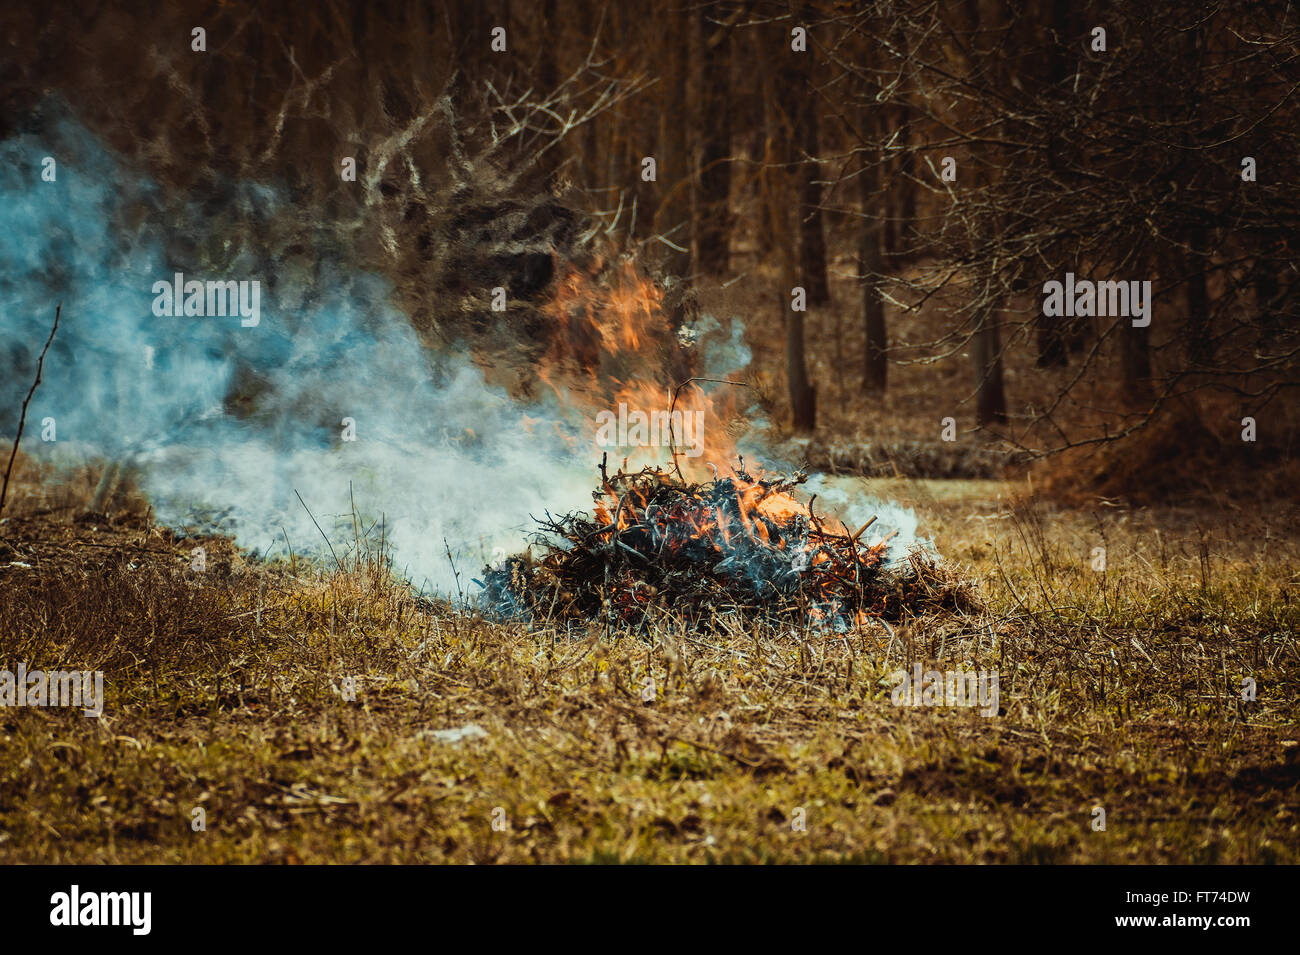 Fire which burned stick and leaves background Stock Photo